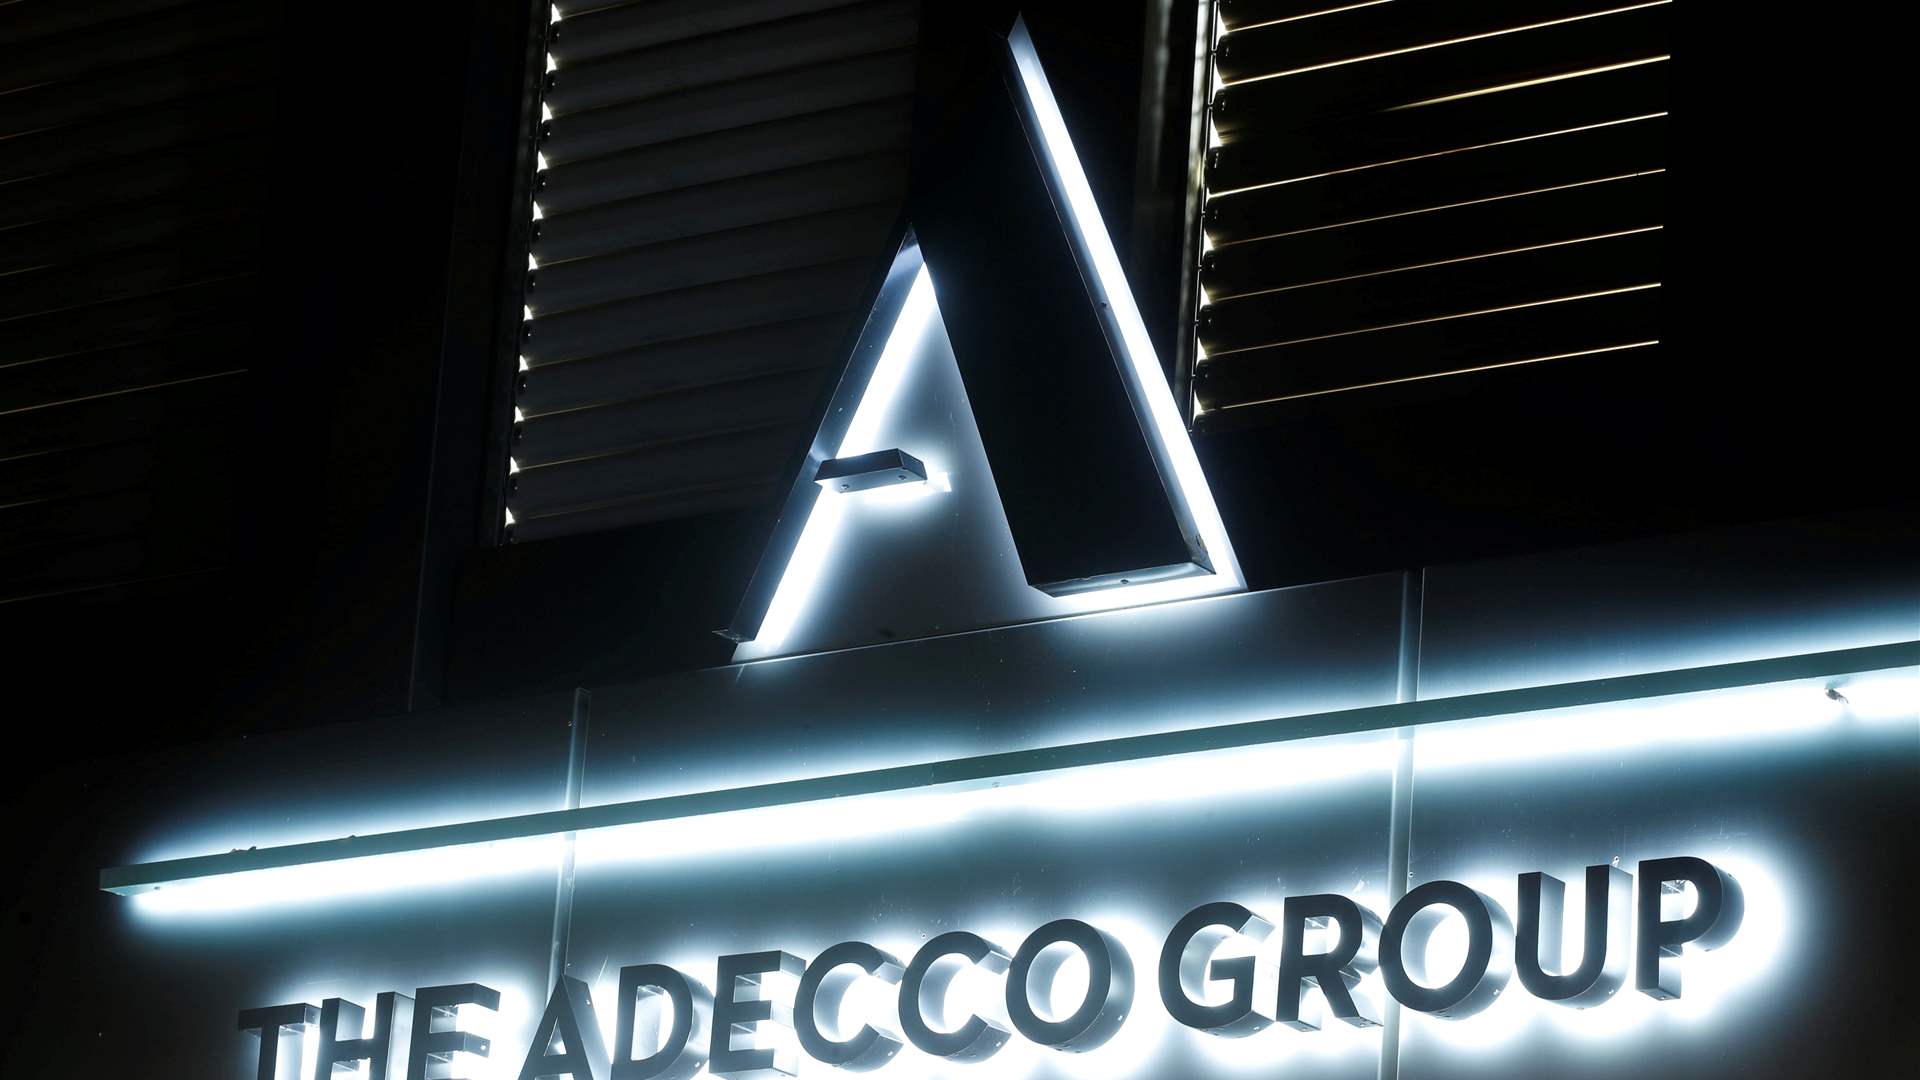 Adecco pledged to find jobs for 85,000 refugees